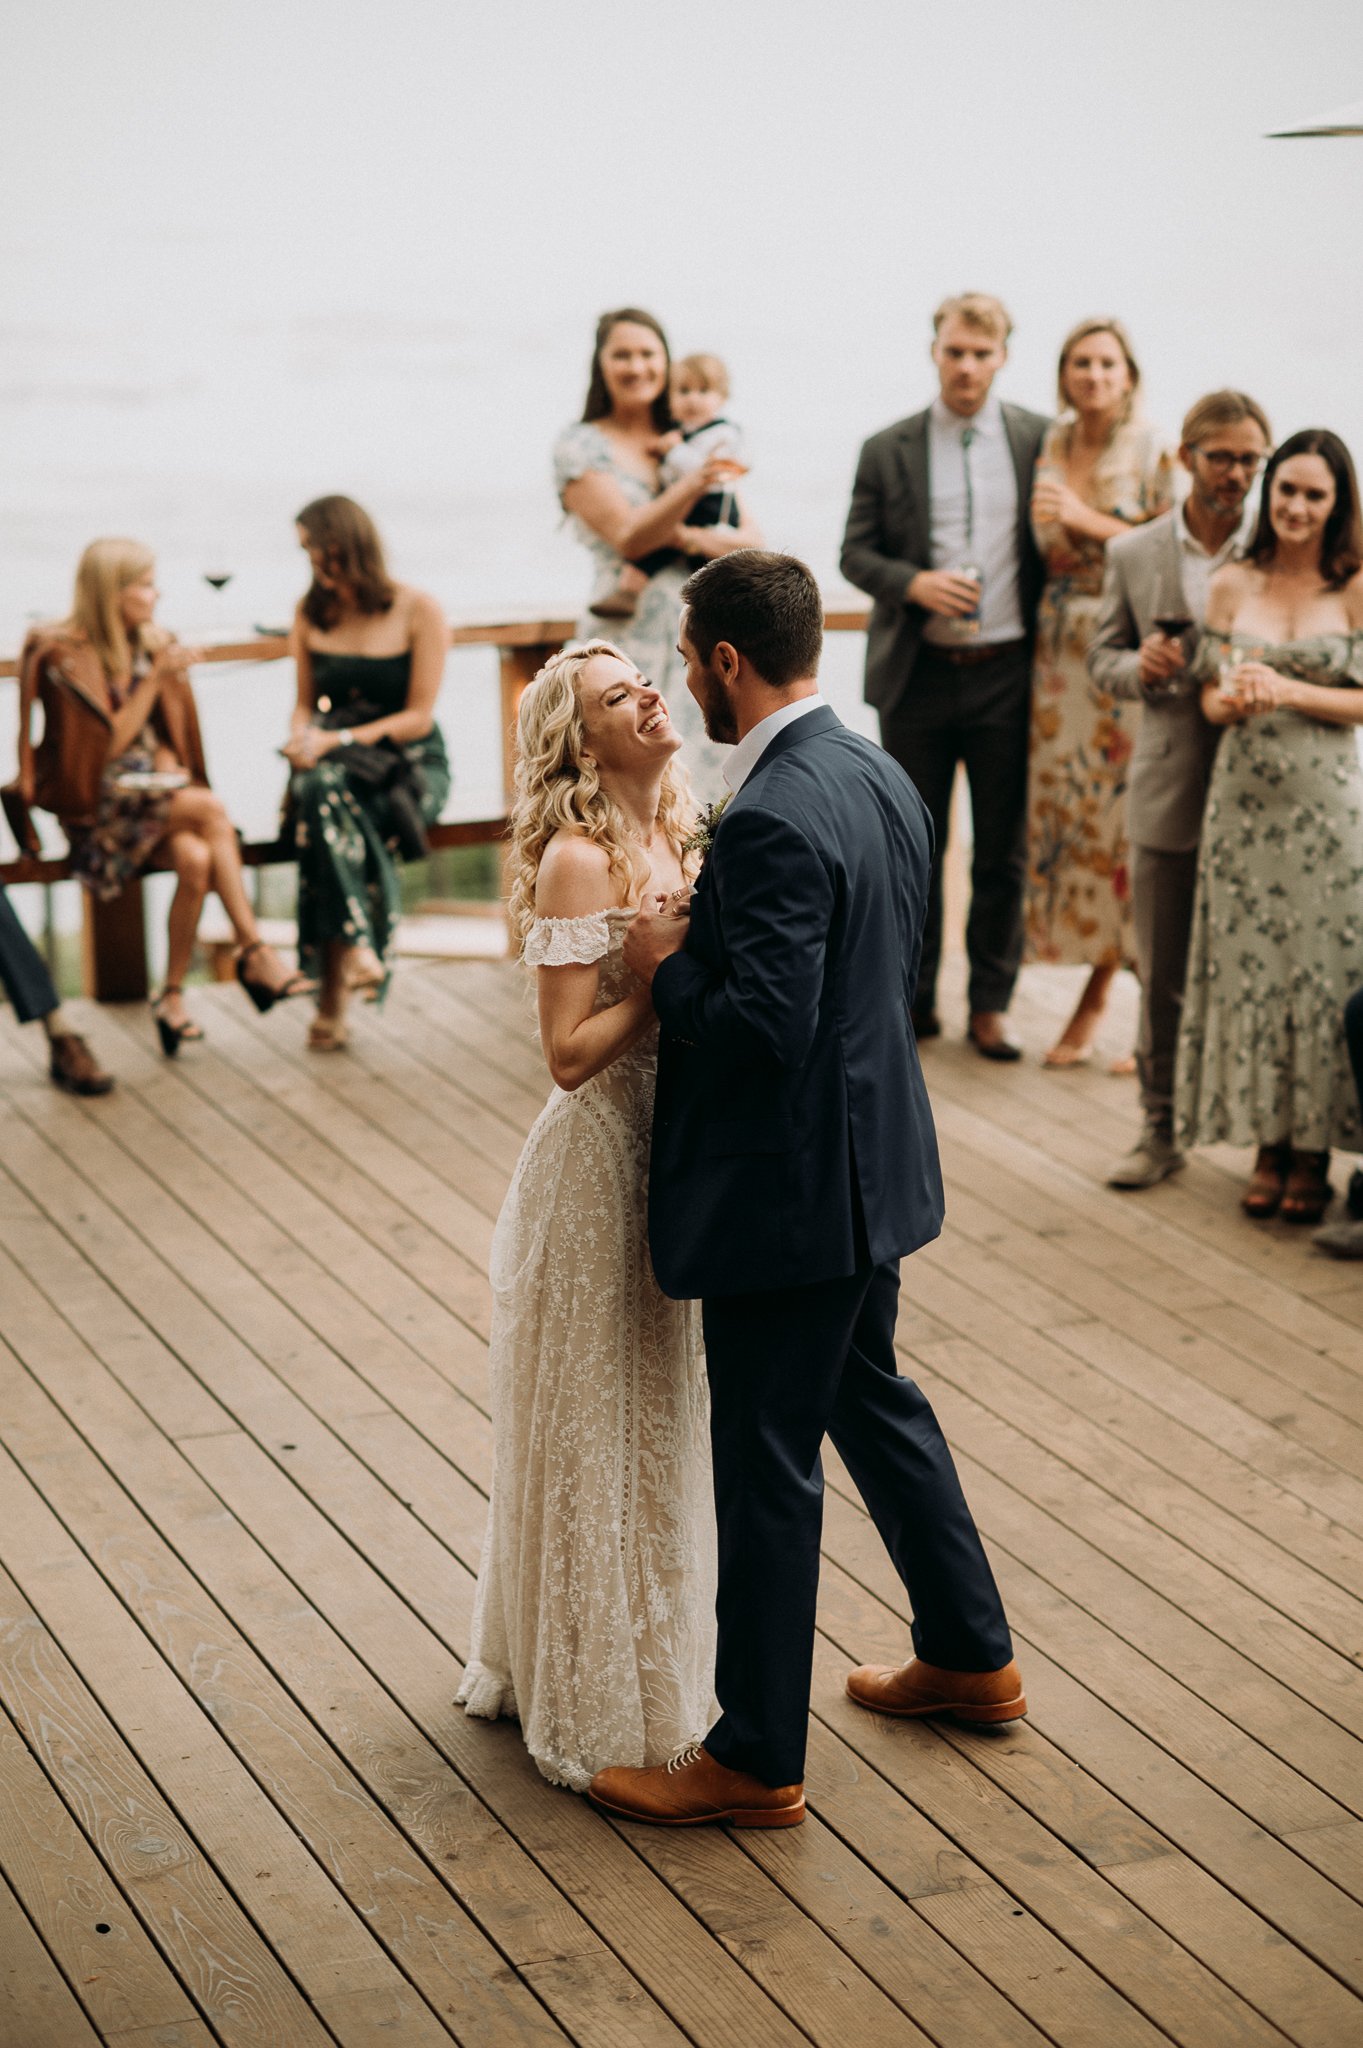 Bride and groom first dance on deck with guest watching and pacific ocean in background